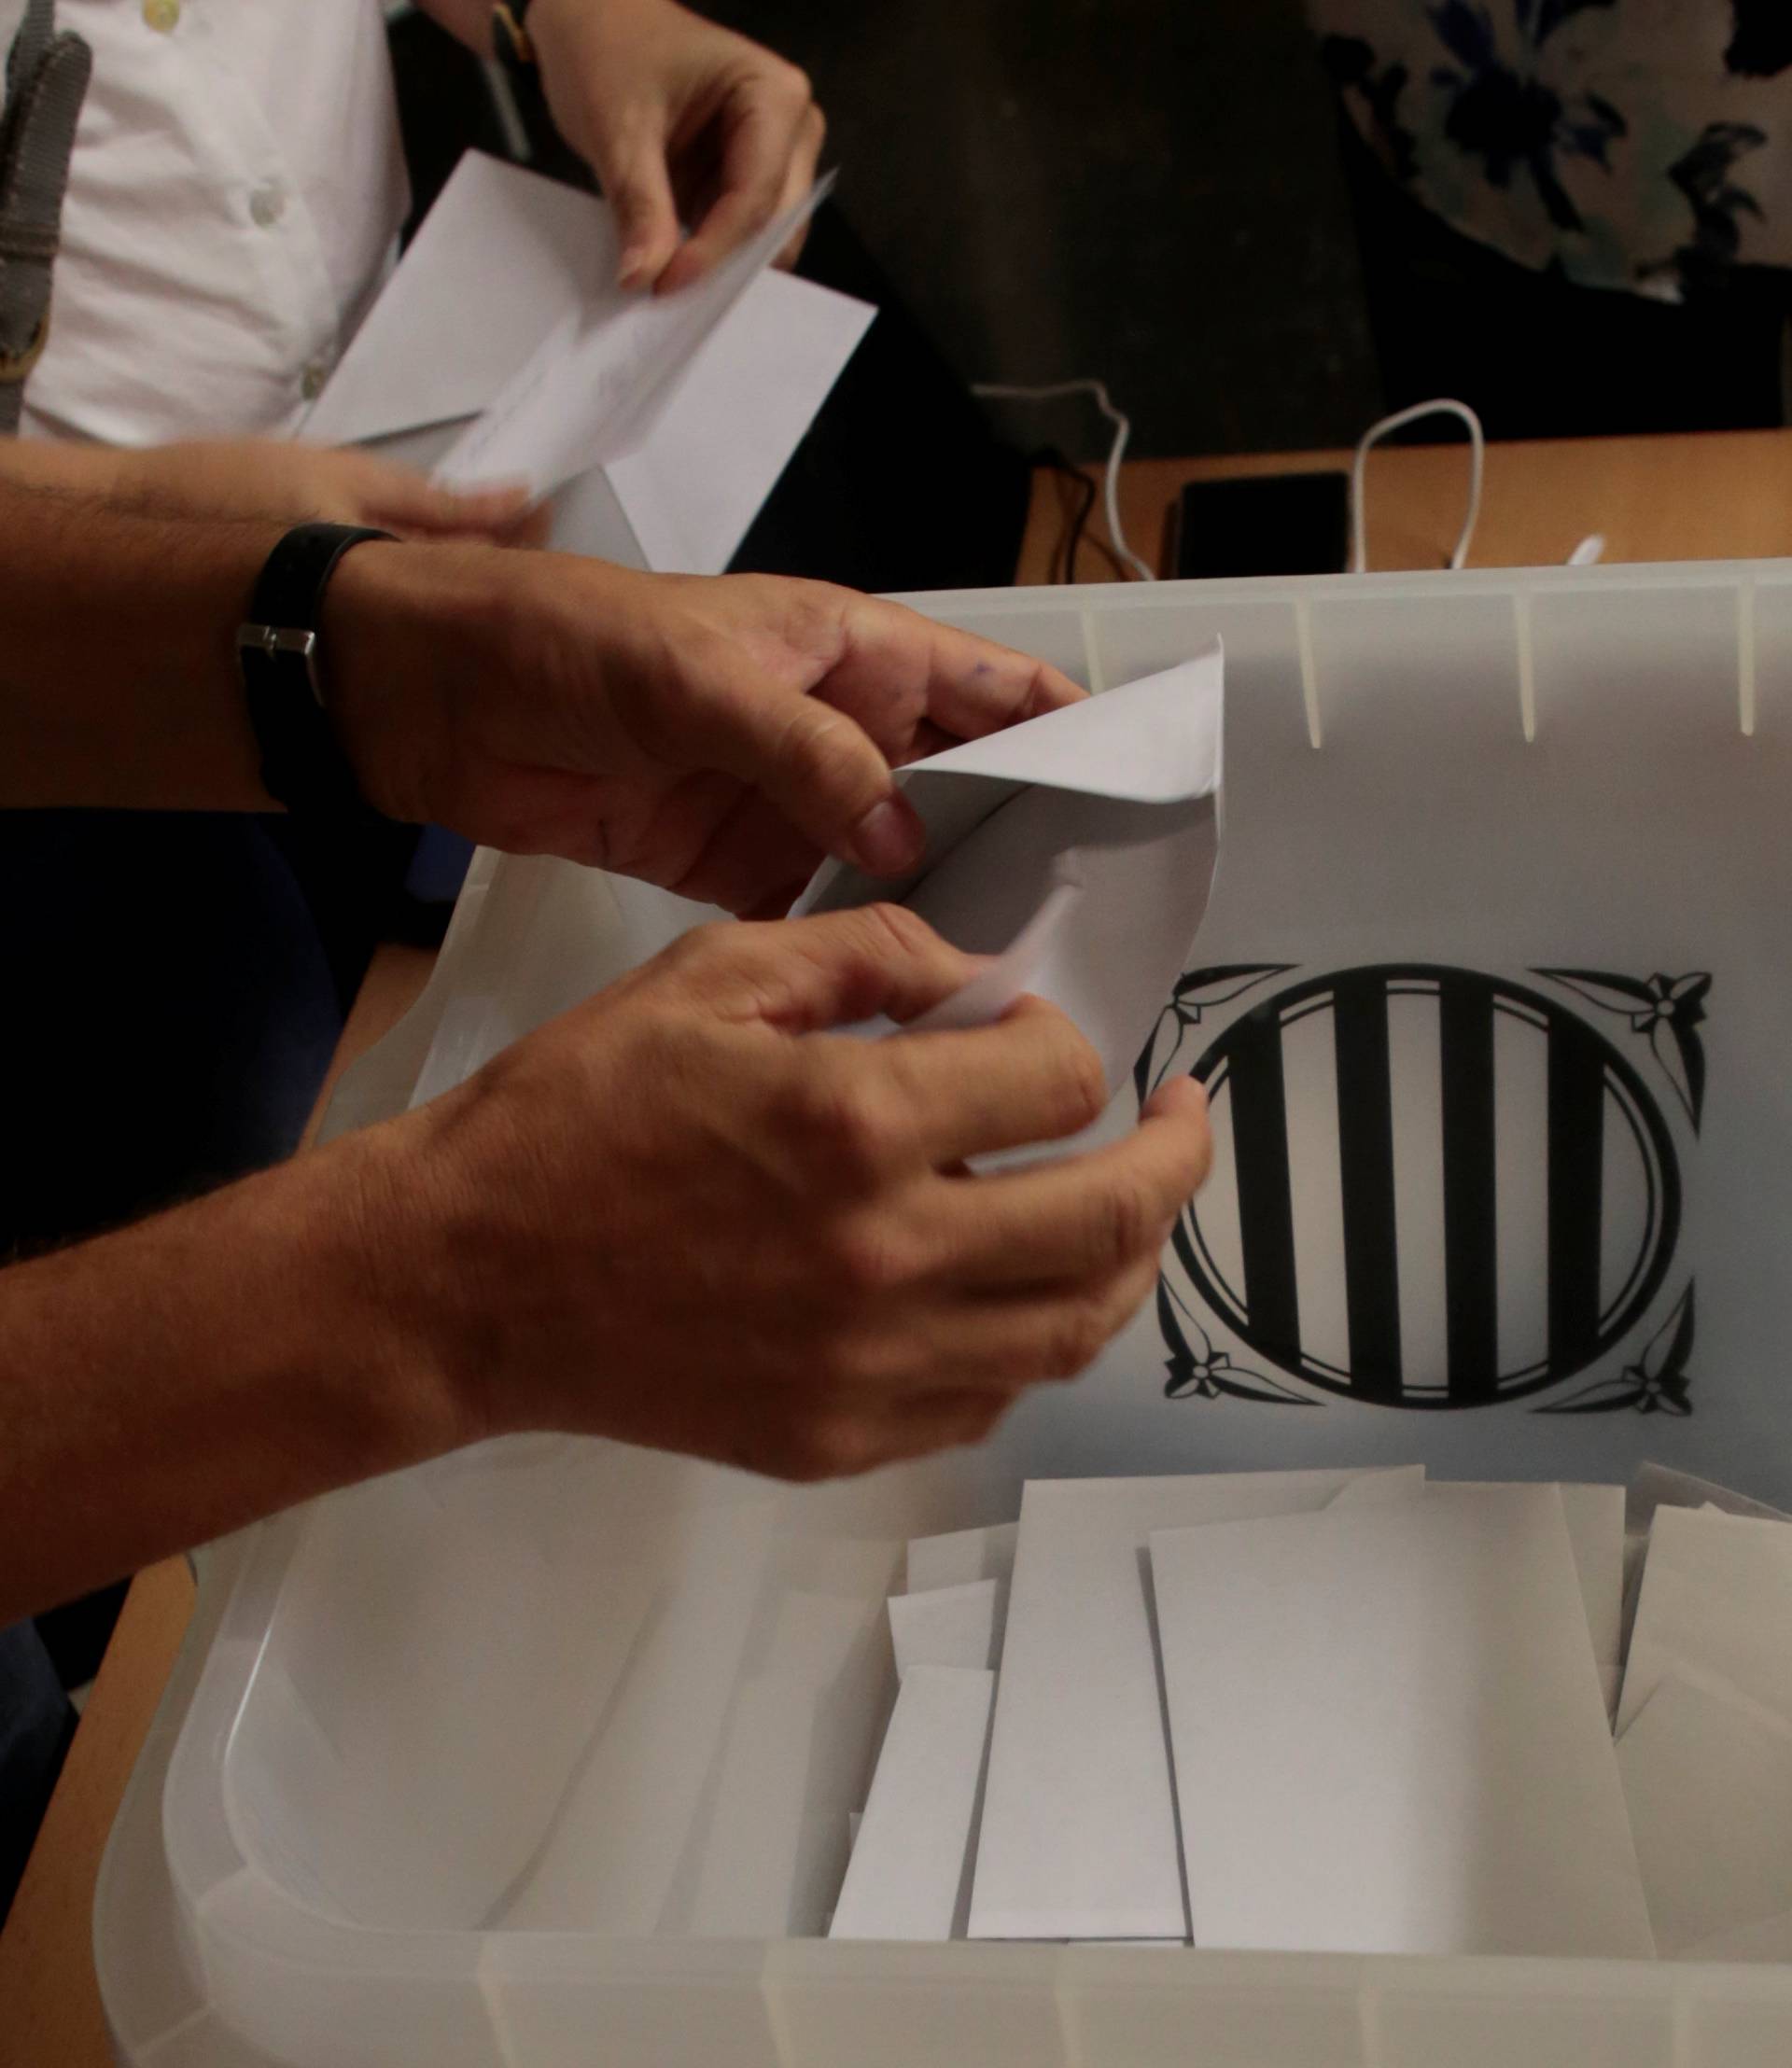 Ballots are counted after the banned independence referendum in Barcelona